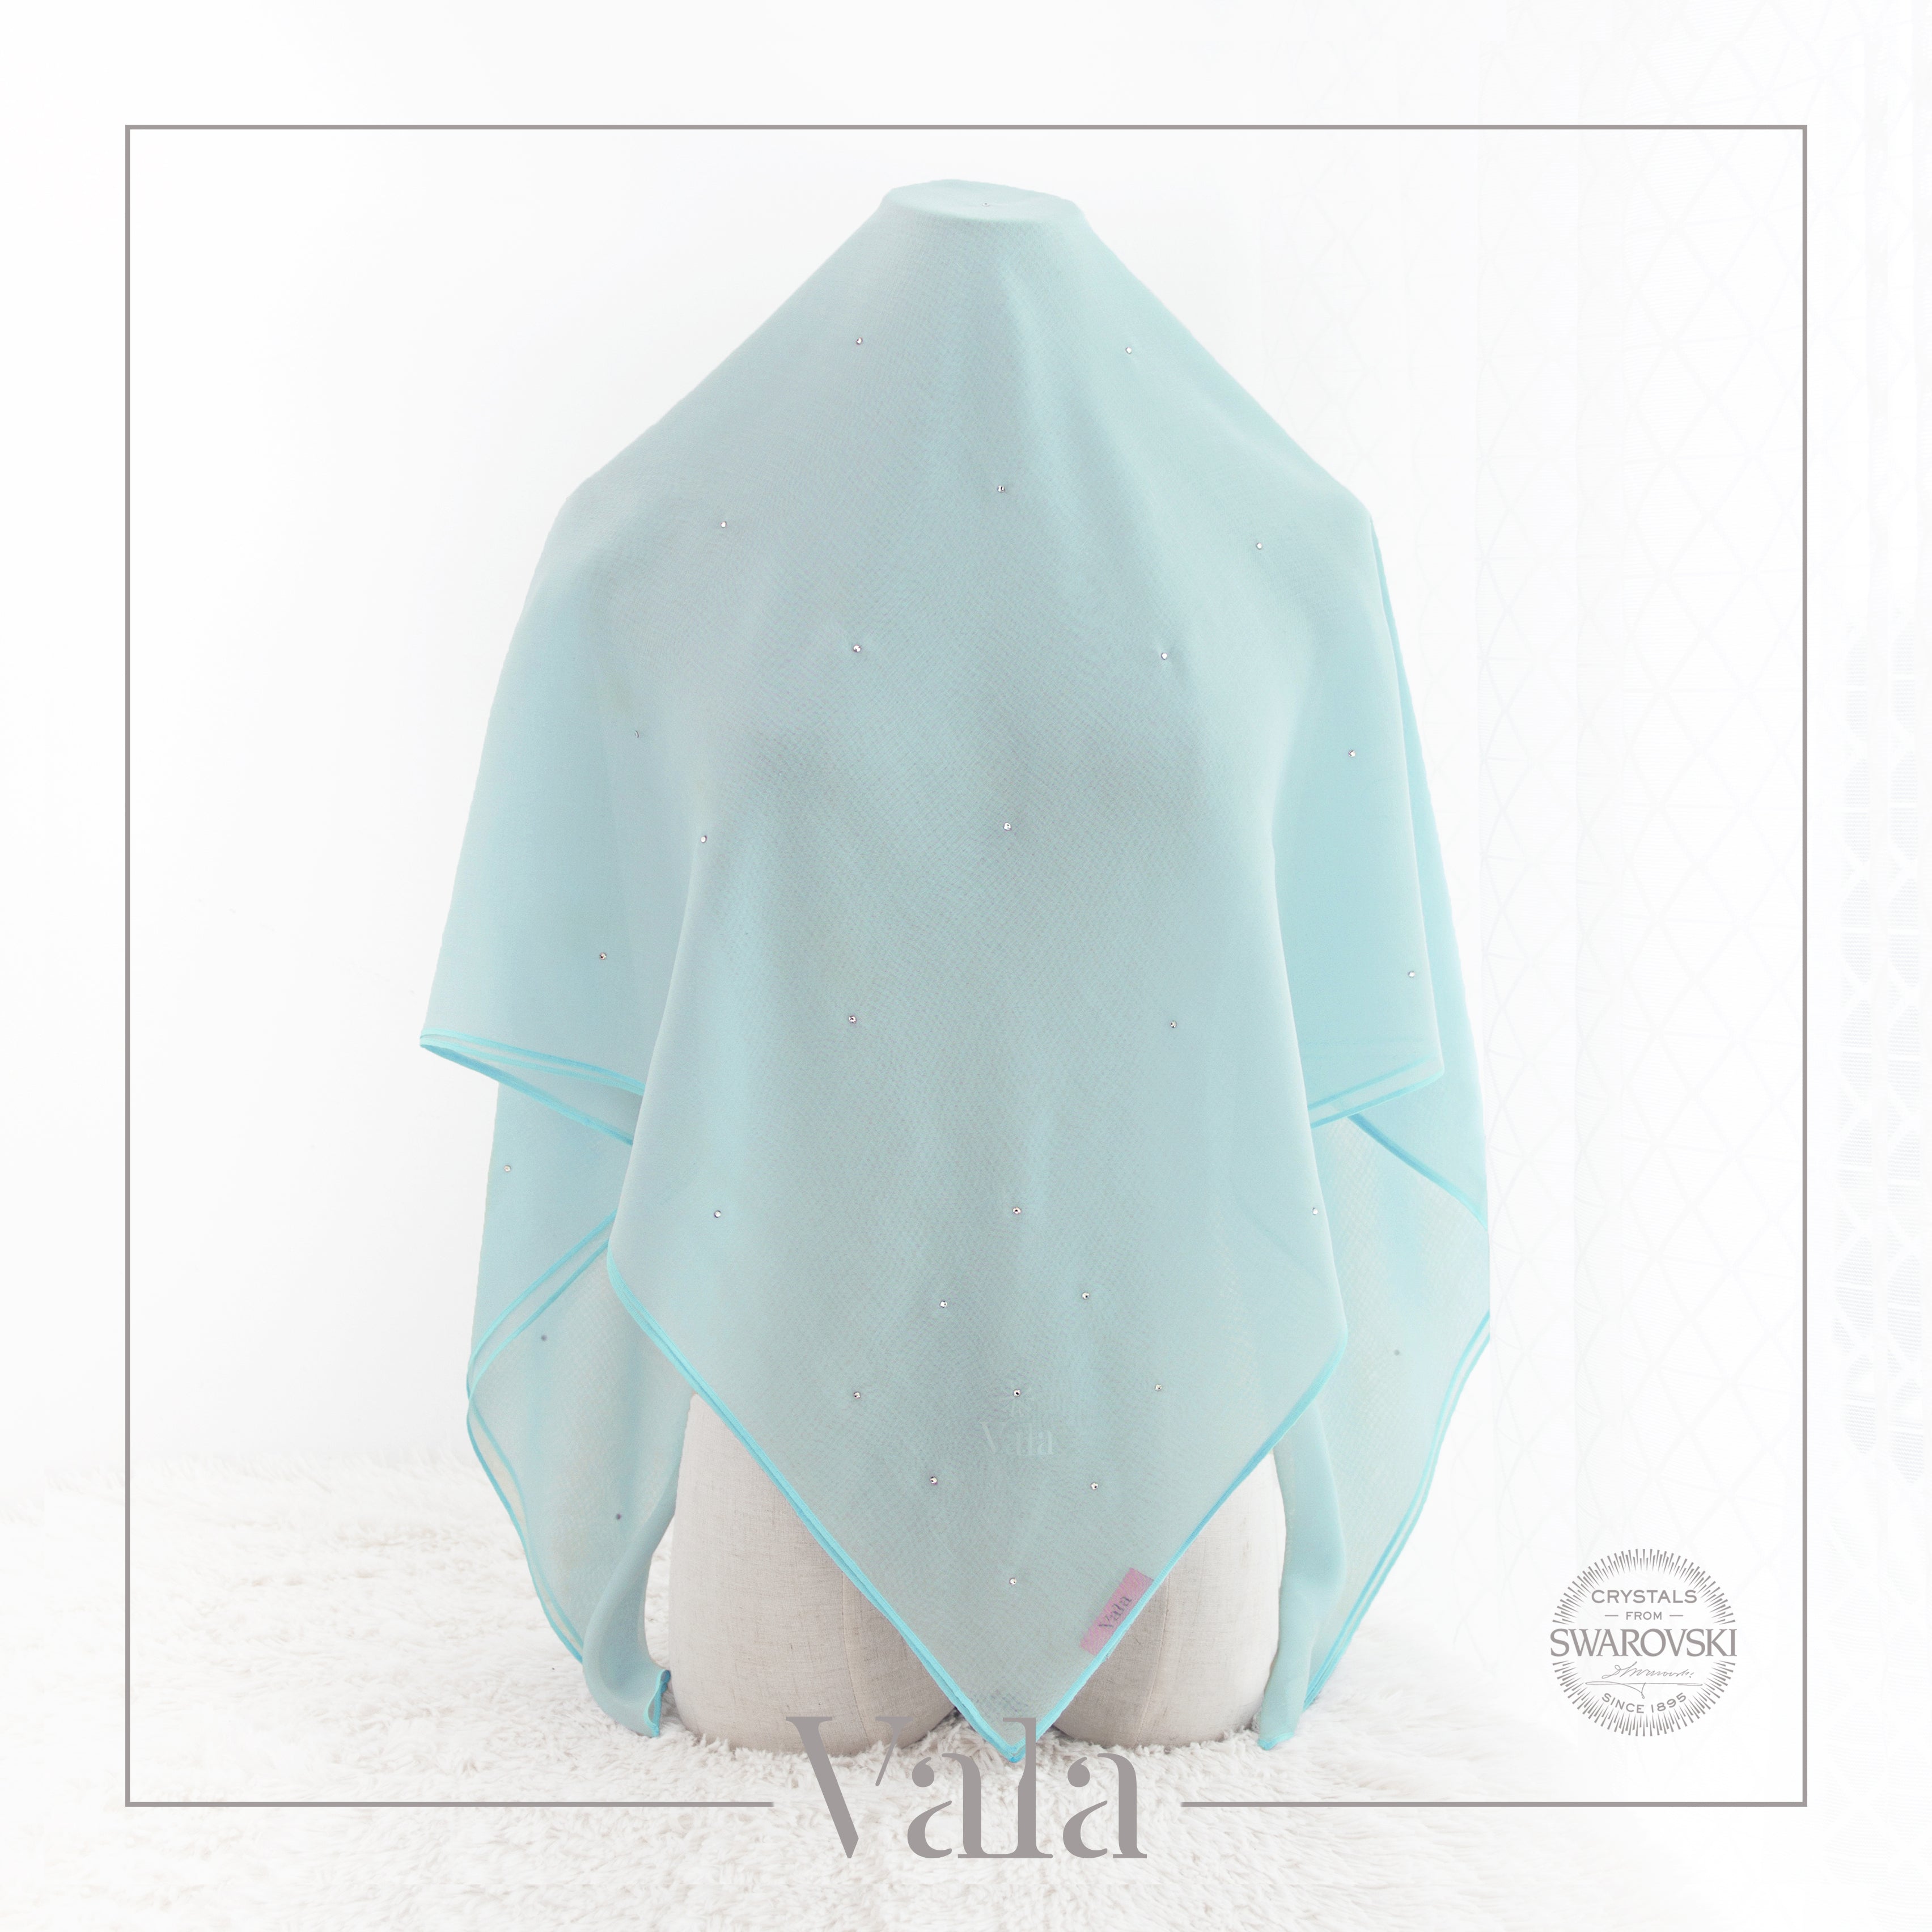 Basic SS10 Square Scarf in Powder Blue